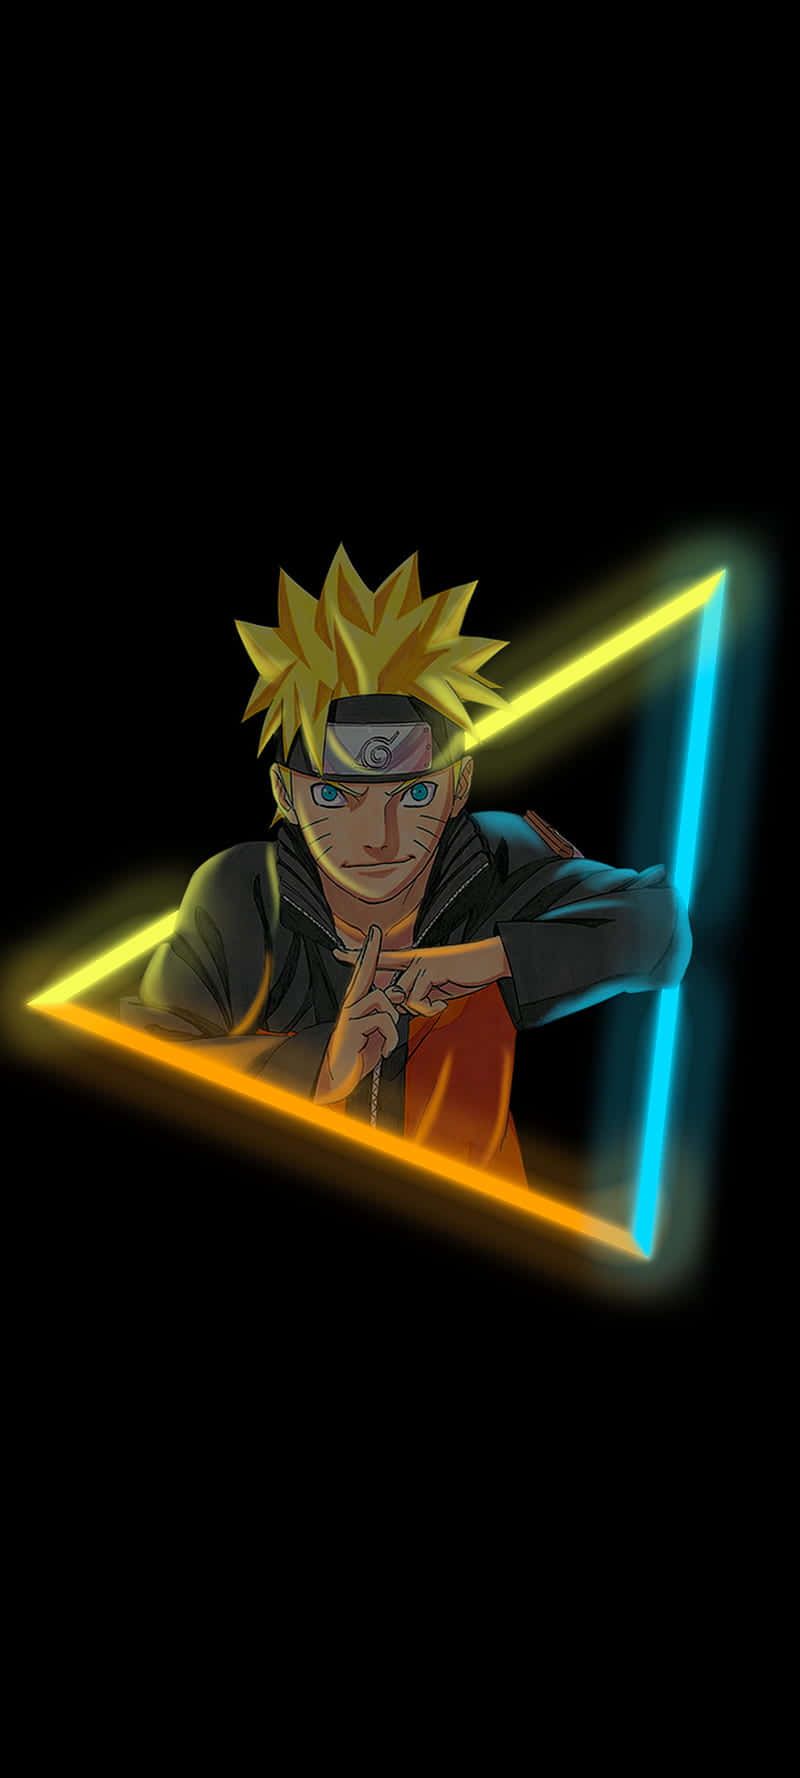 Naruto Wallpaper iPhone with high-resolution 1080x1920 pixel. You can use this wallpaper for your iPhone 5, 6, 7, 8, X, XS, XR backgrounds, Mobile Screensaver, or iPad Lock Screen - Naruto